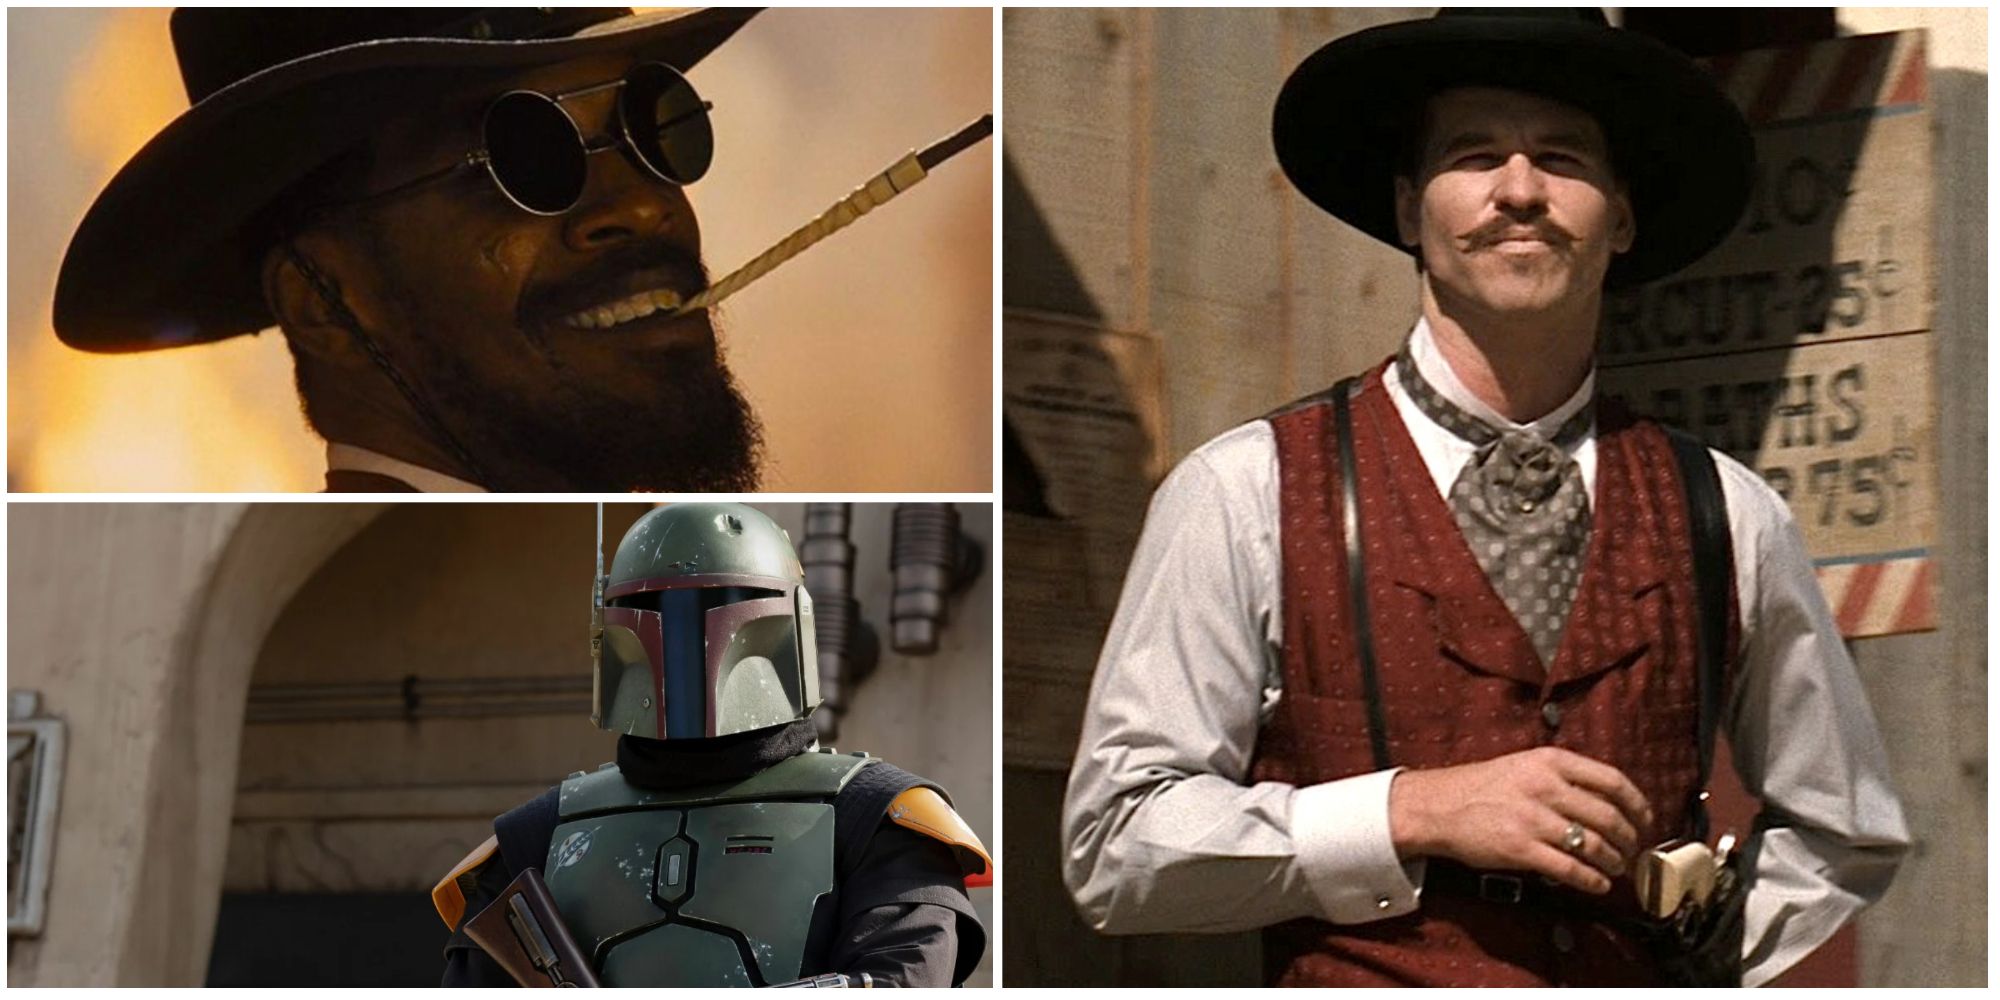 django, boba fett and doc holliday in a photo collage